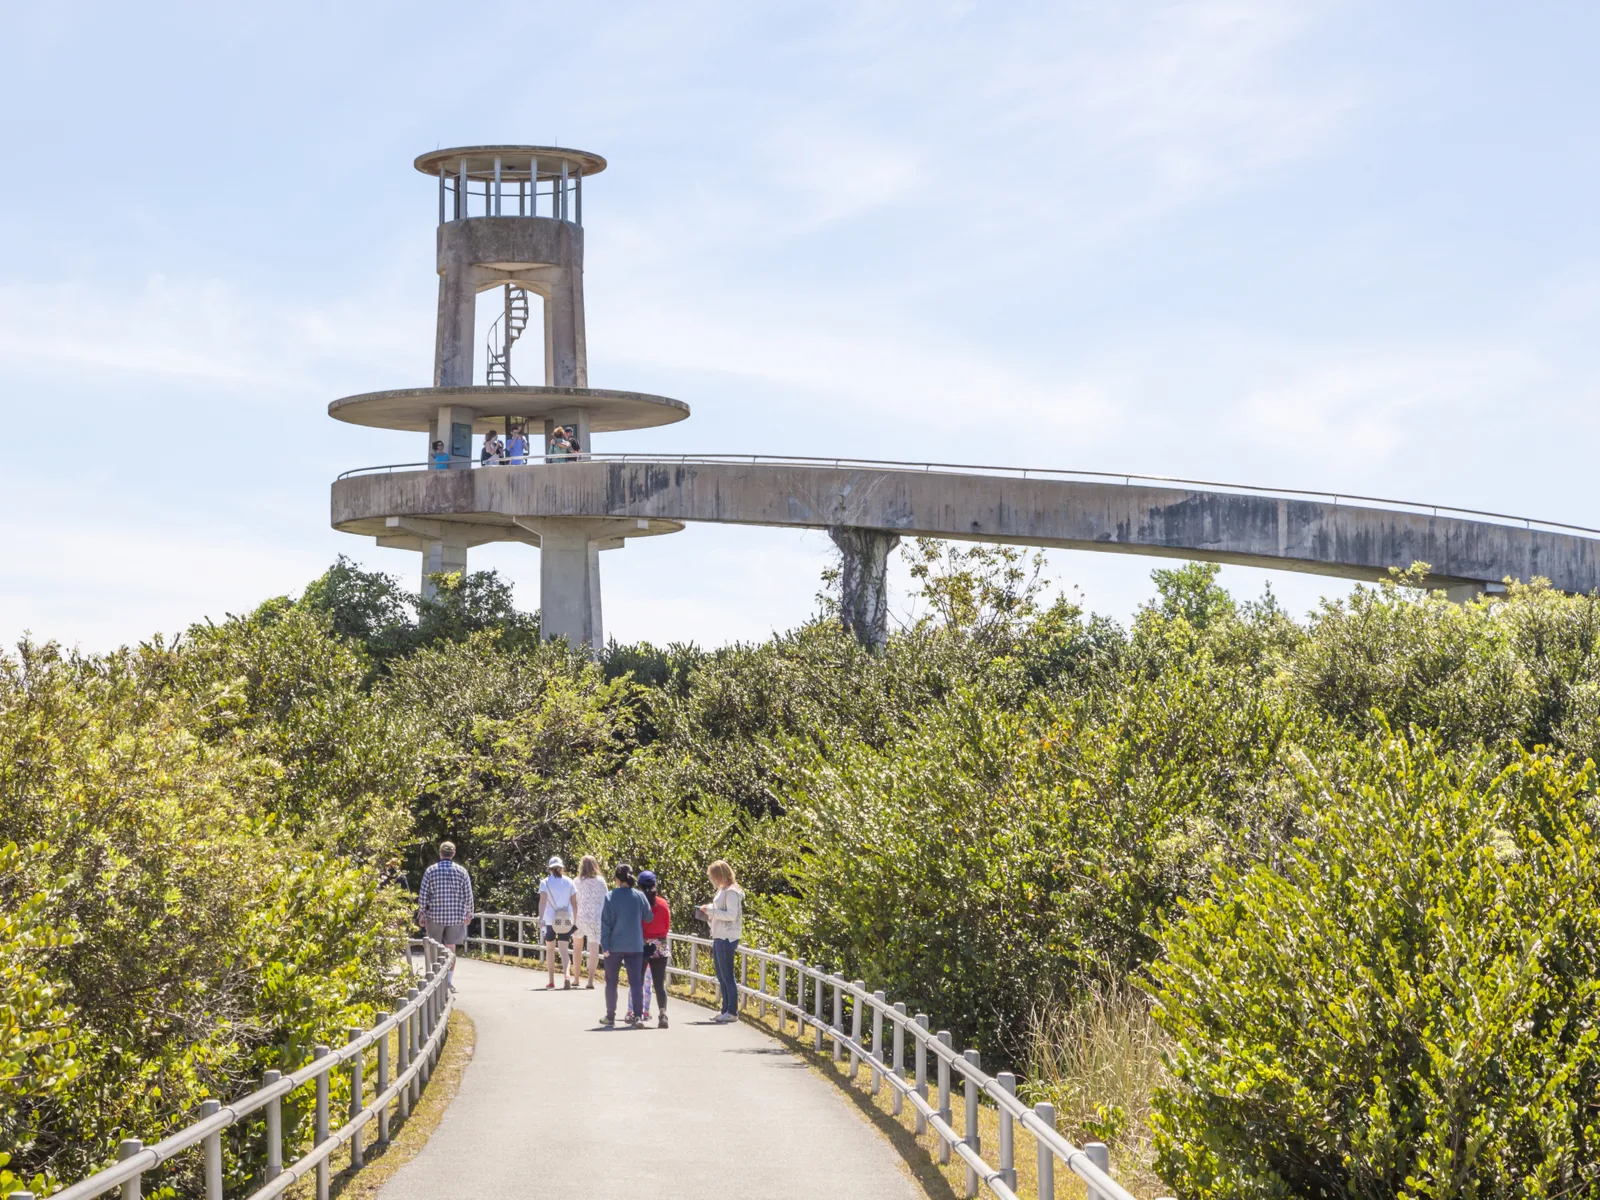 One of the best things to do in Florida, Tamiami Park shark observation tower